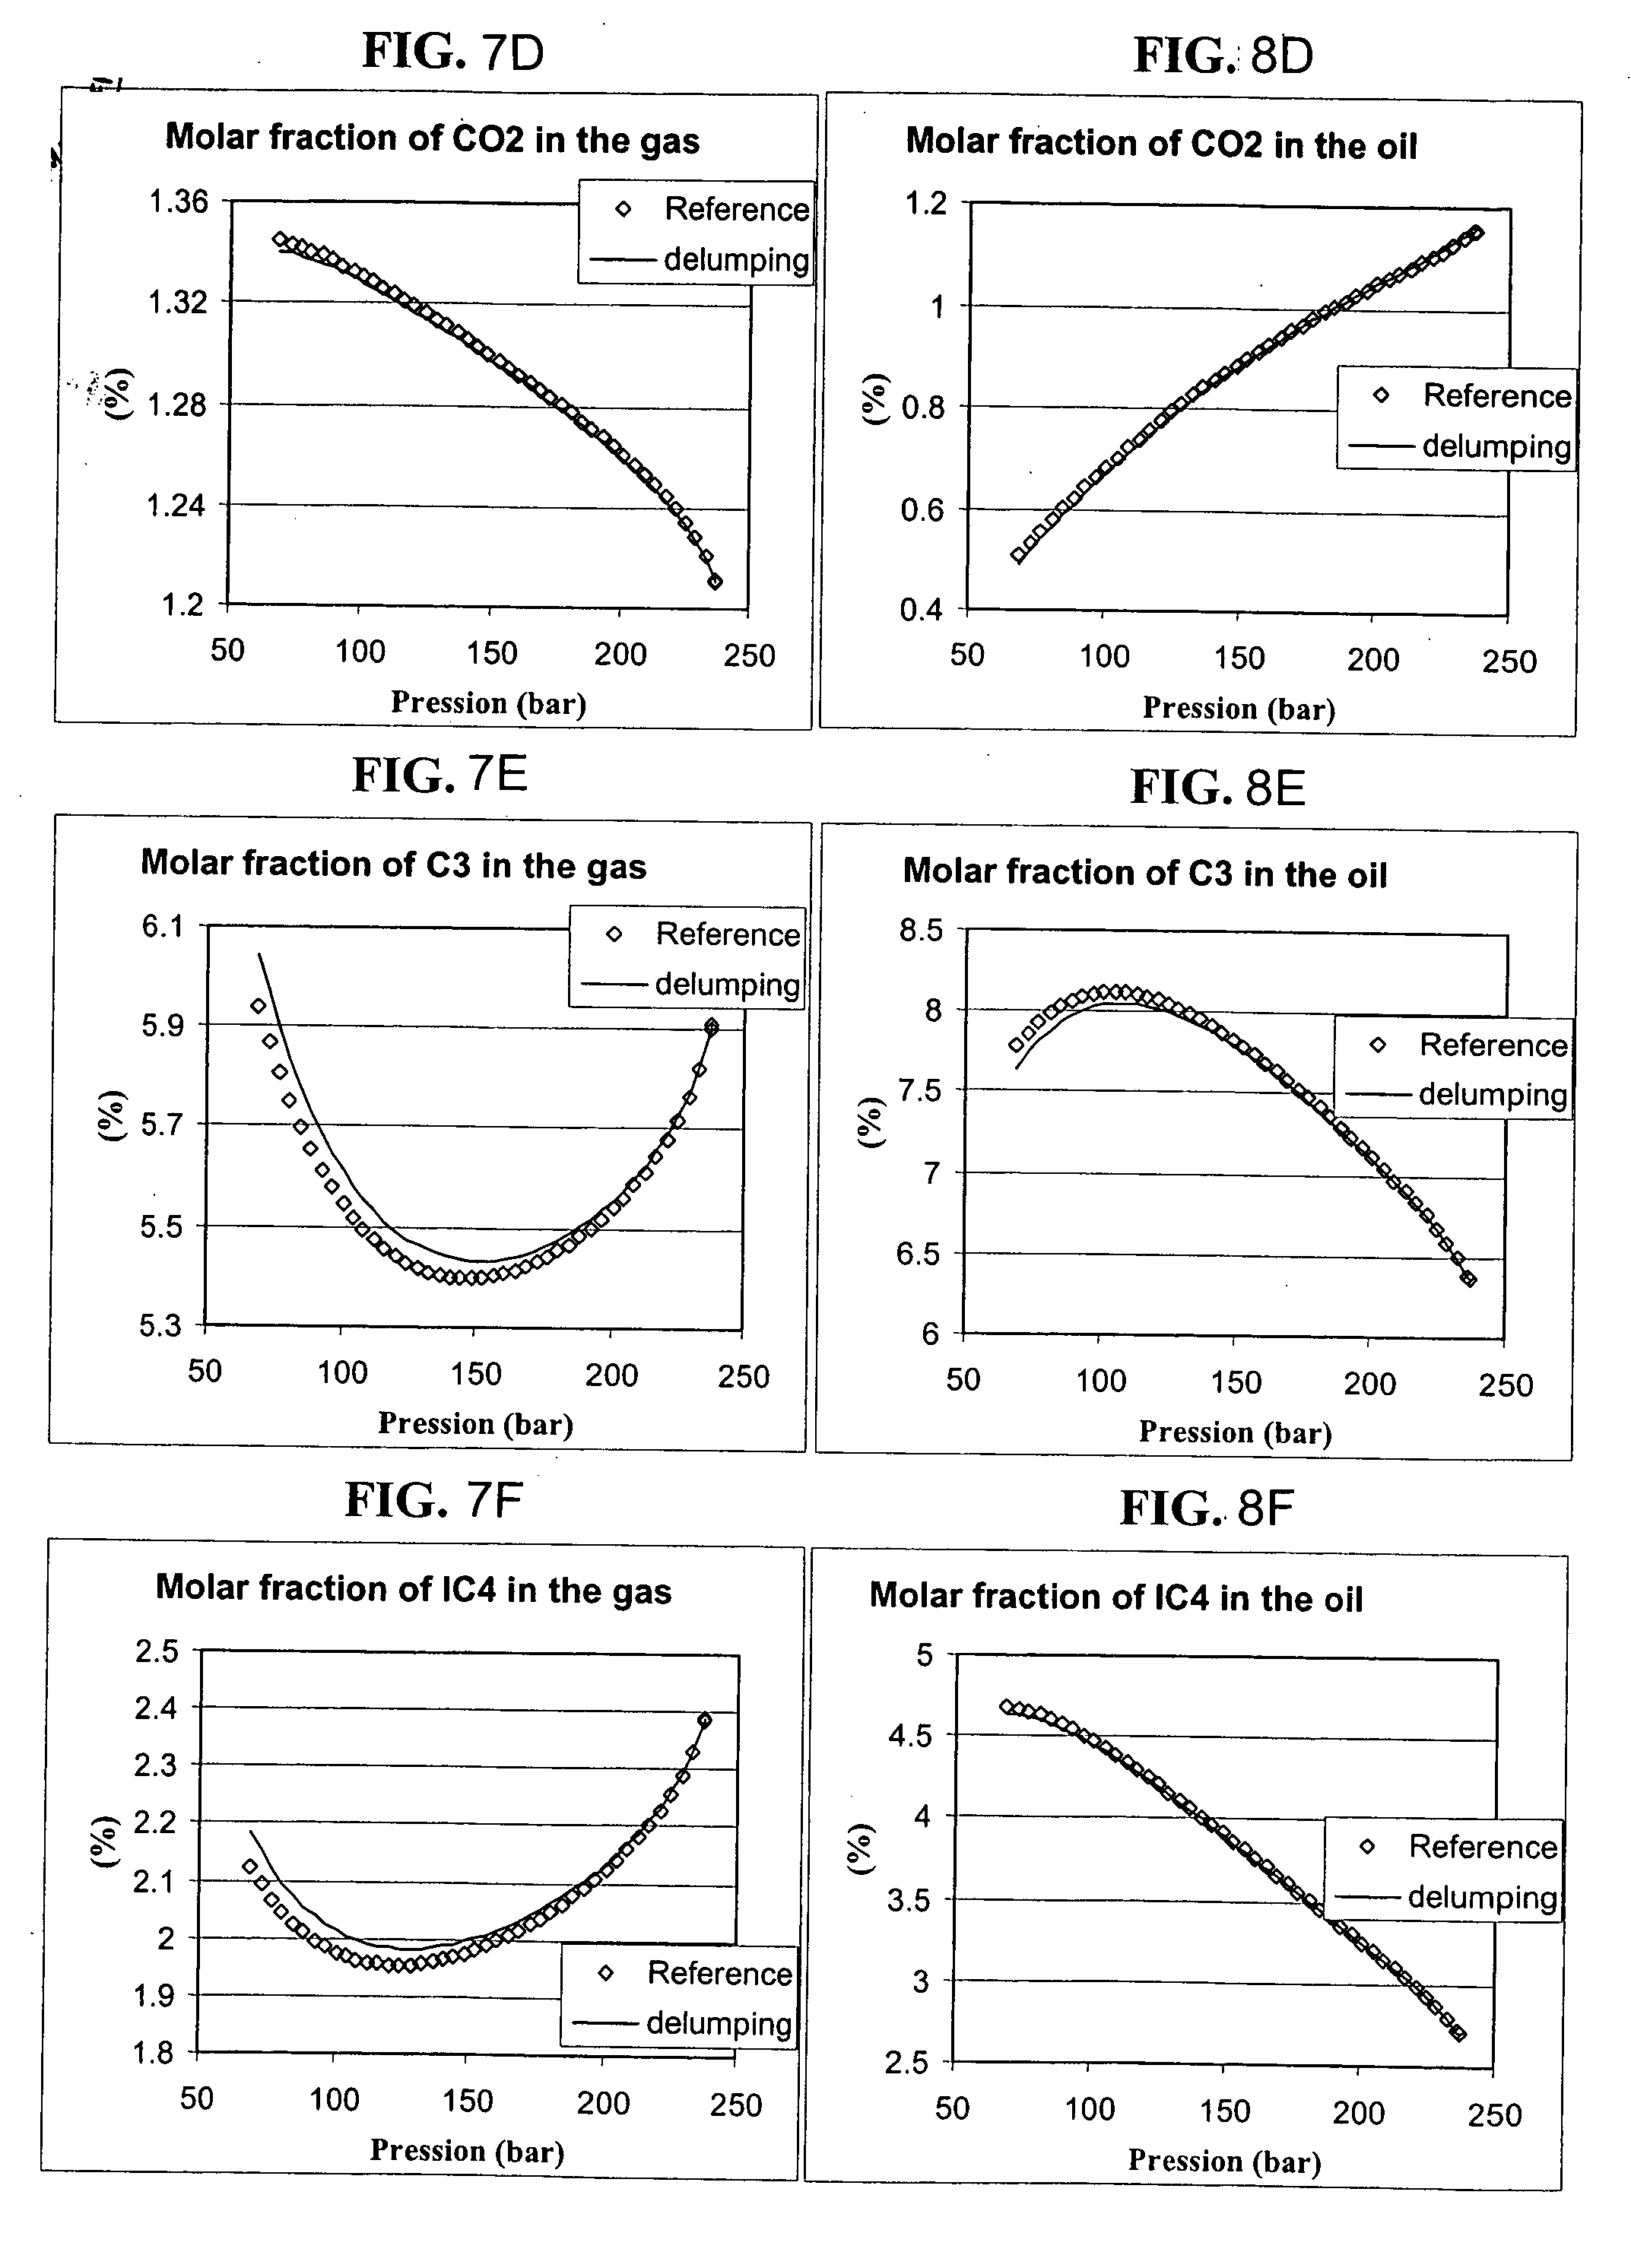 Lumping and delumping method for describing hydrocarbon-containing fluids